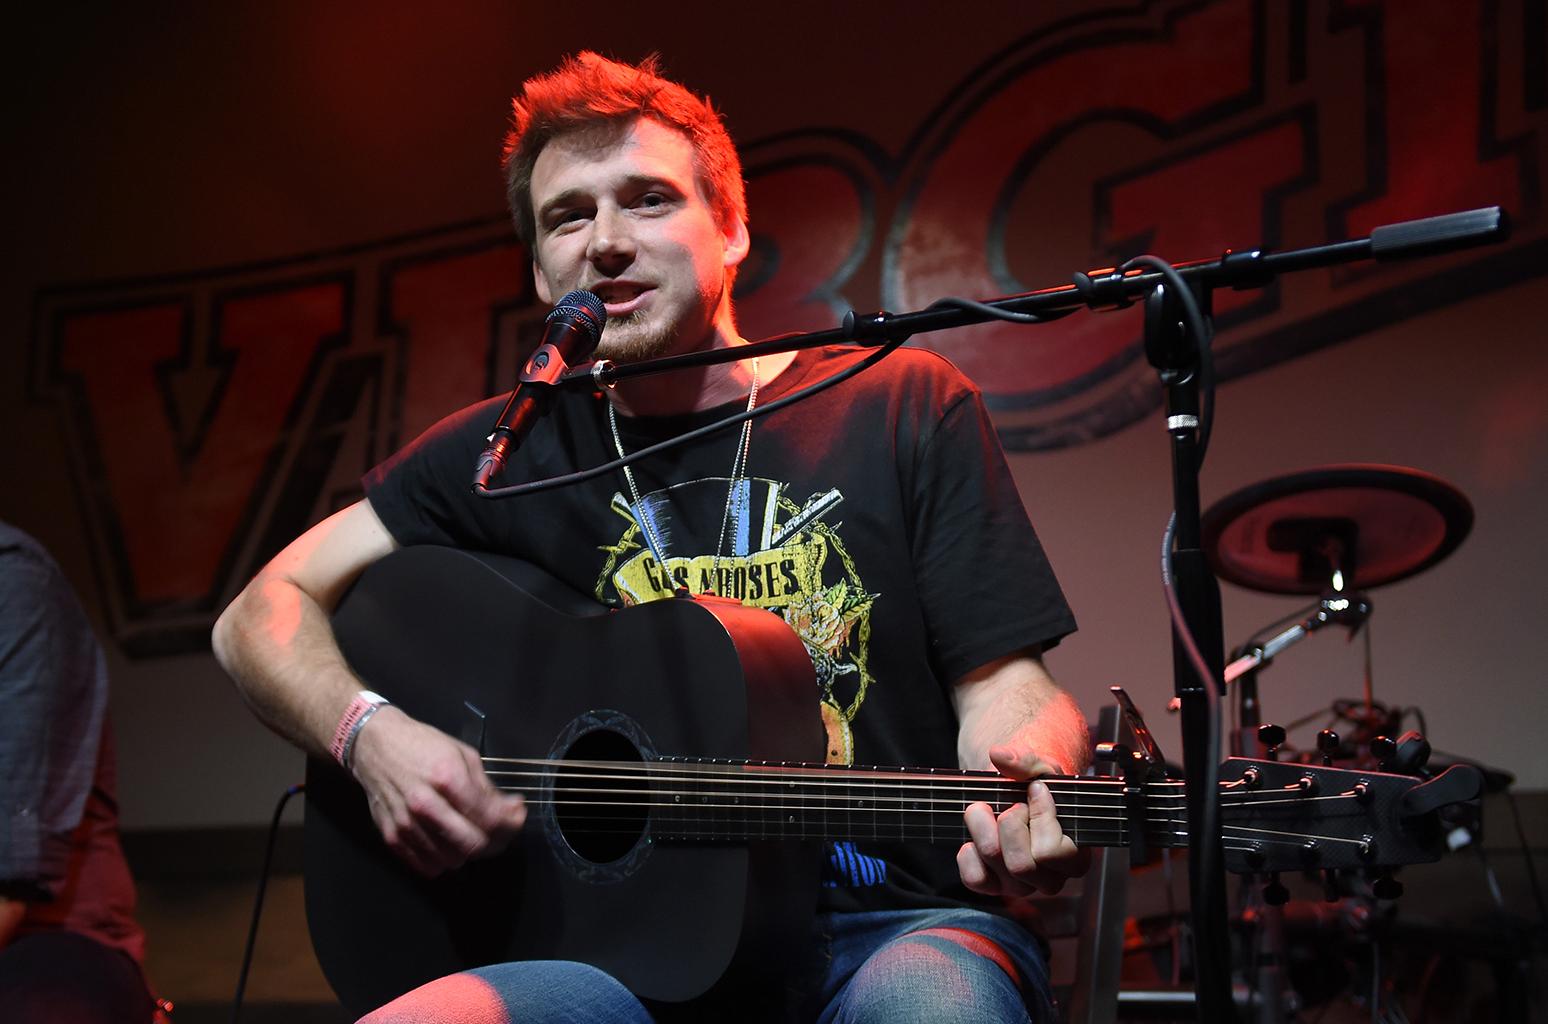 Morgan Wallen's 'Whiskey Glasses' and Aaron Lewis' 'State' Have Big